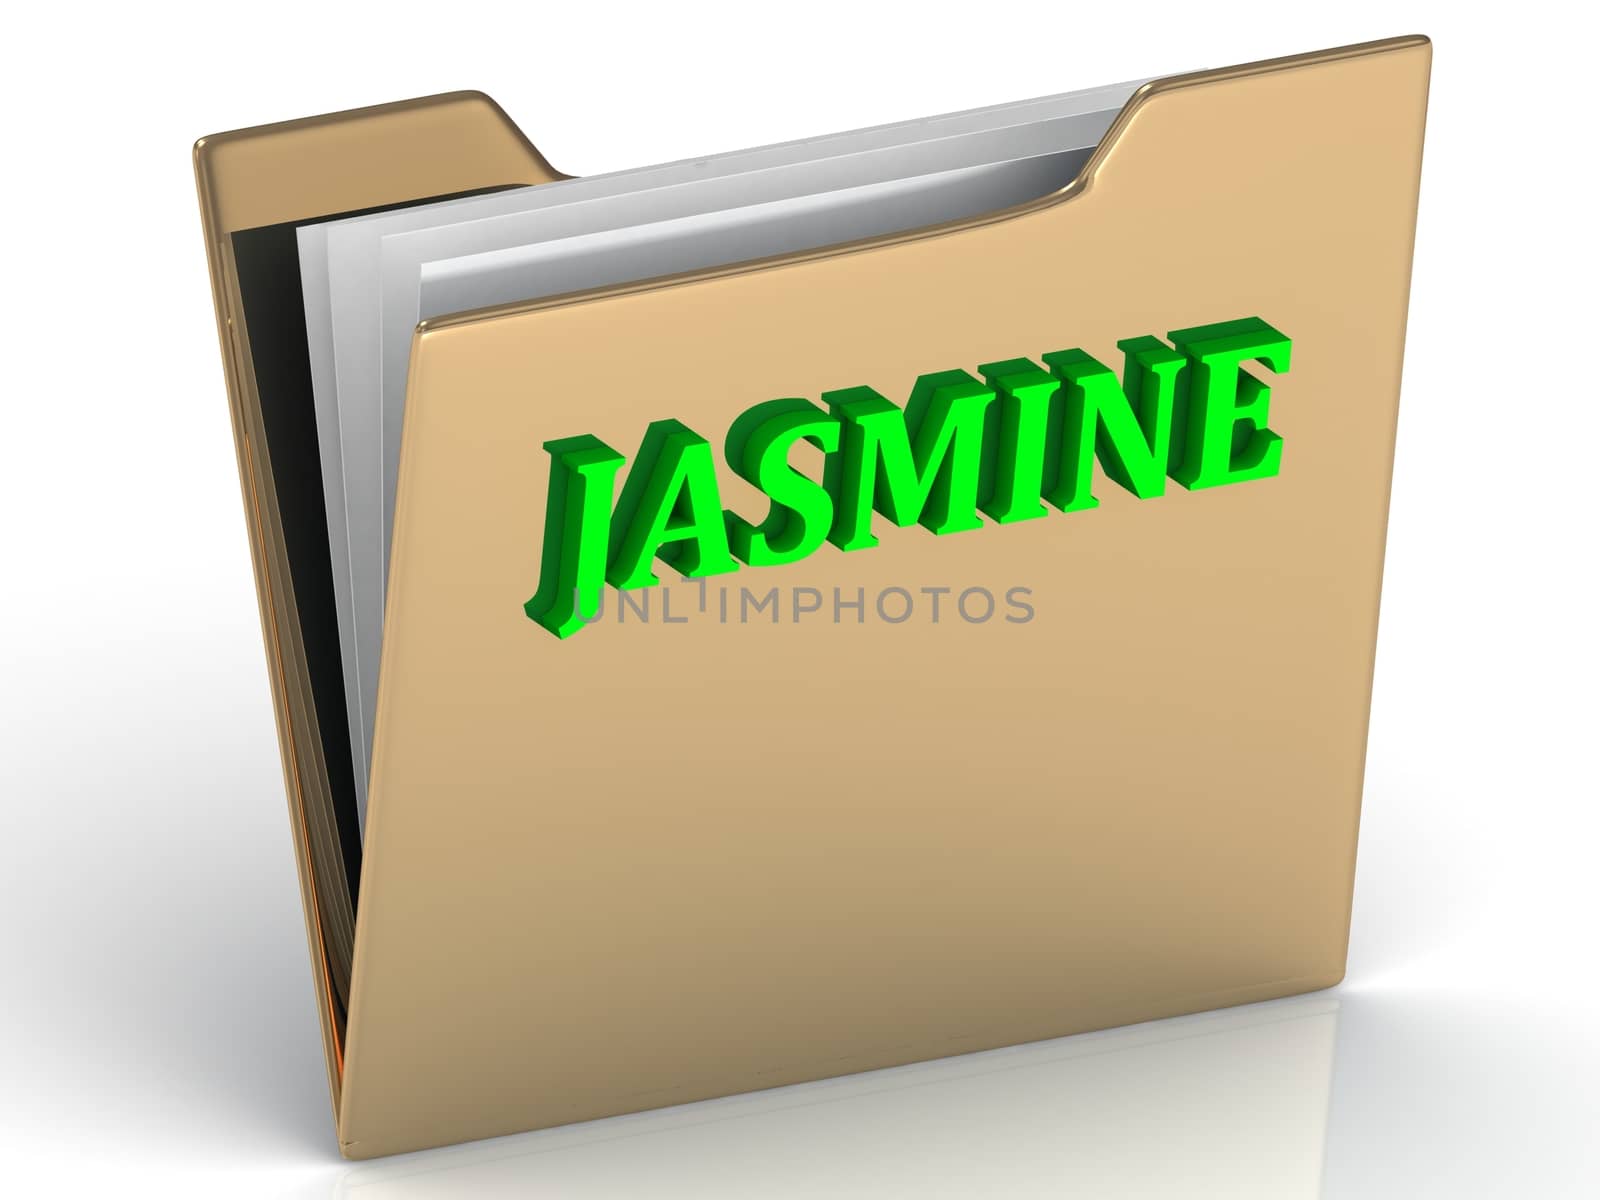 JASMINE- bright green letters on gold paperwork folder by GreenMost